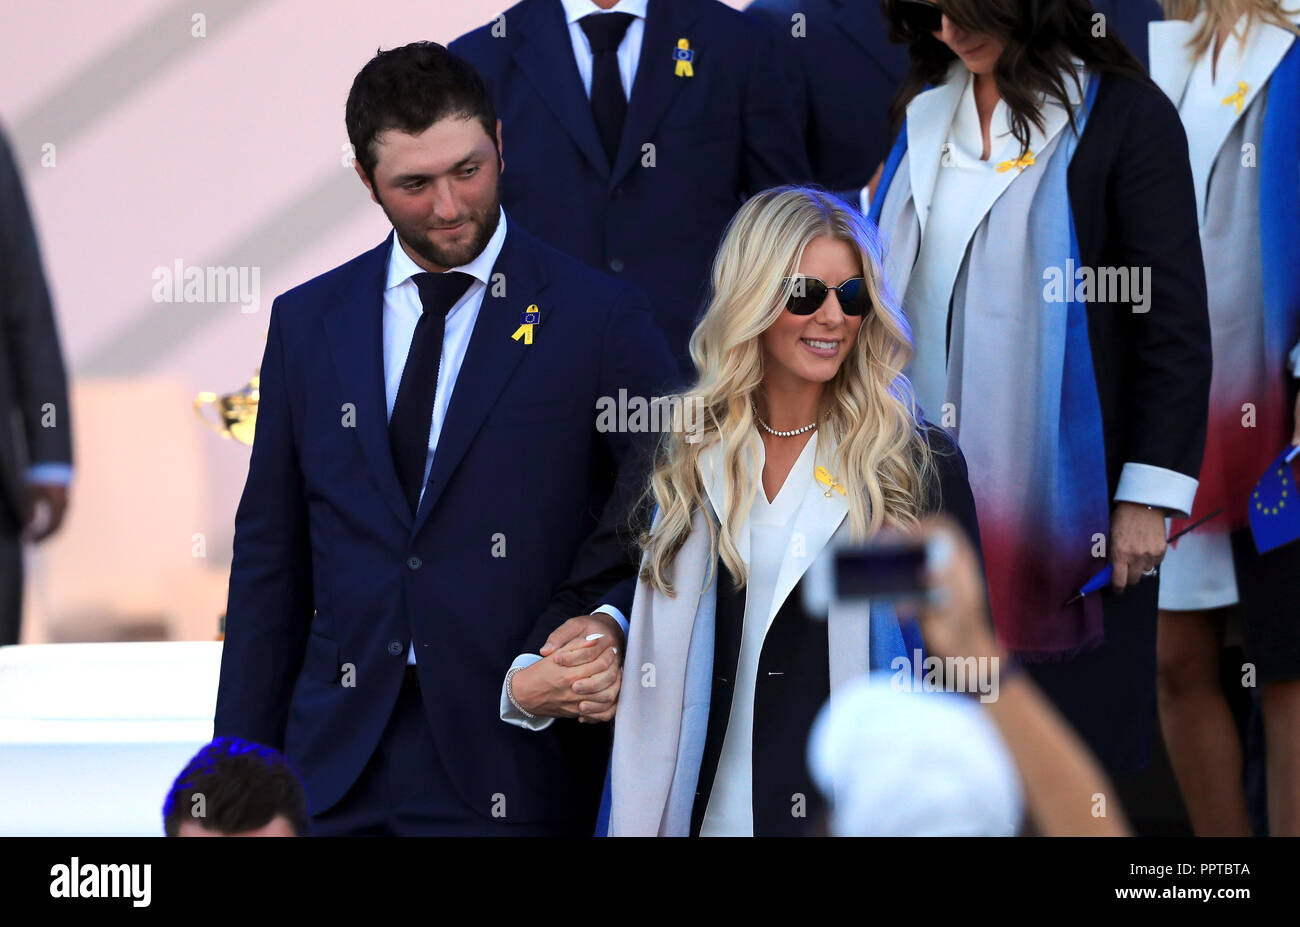 Jon Rahm and Kelley Cahill during the opening ceremony of the Ryder Cup at Le Golf National, Saint-Quentin-en-Yvelines, Paris Stock Photo